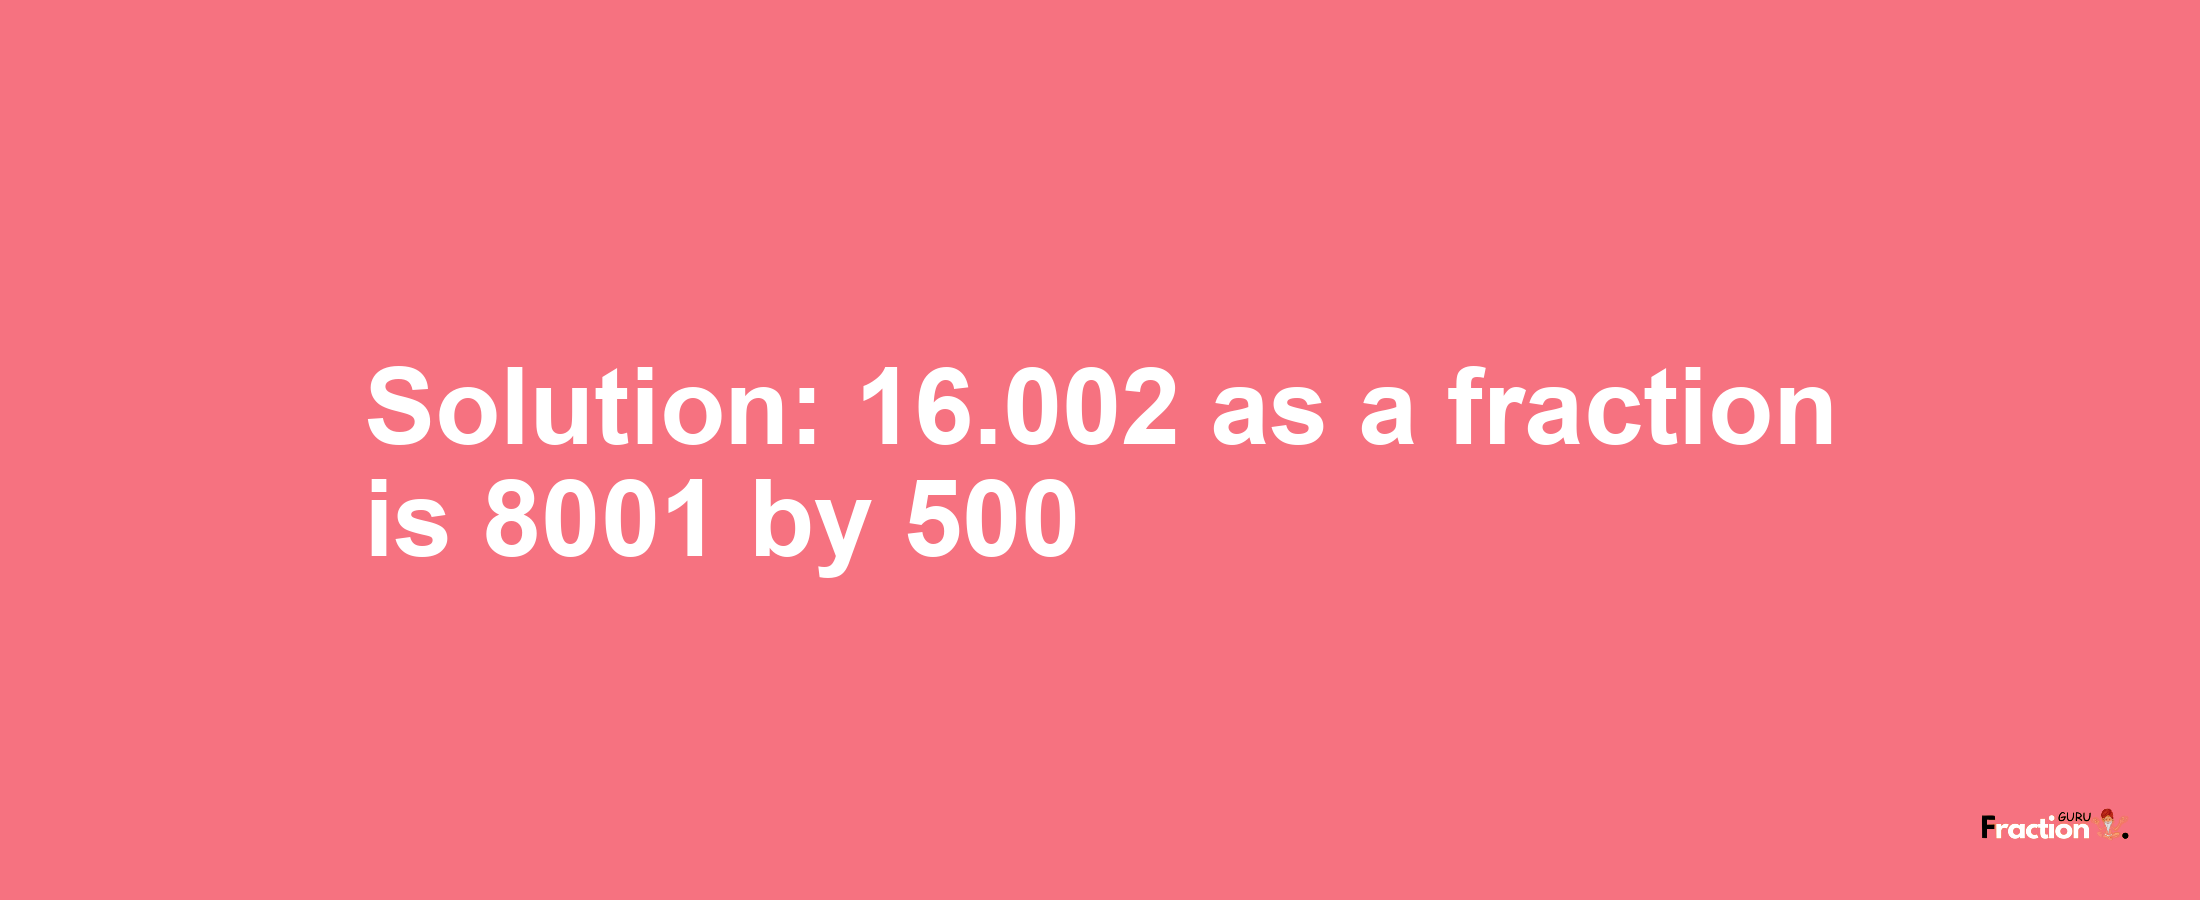 Solution:16.002 as a fraction is 8001/500